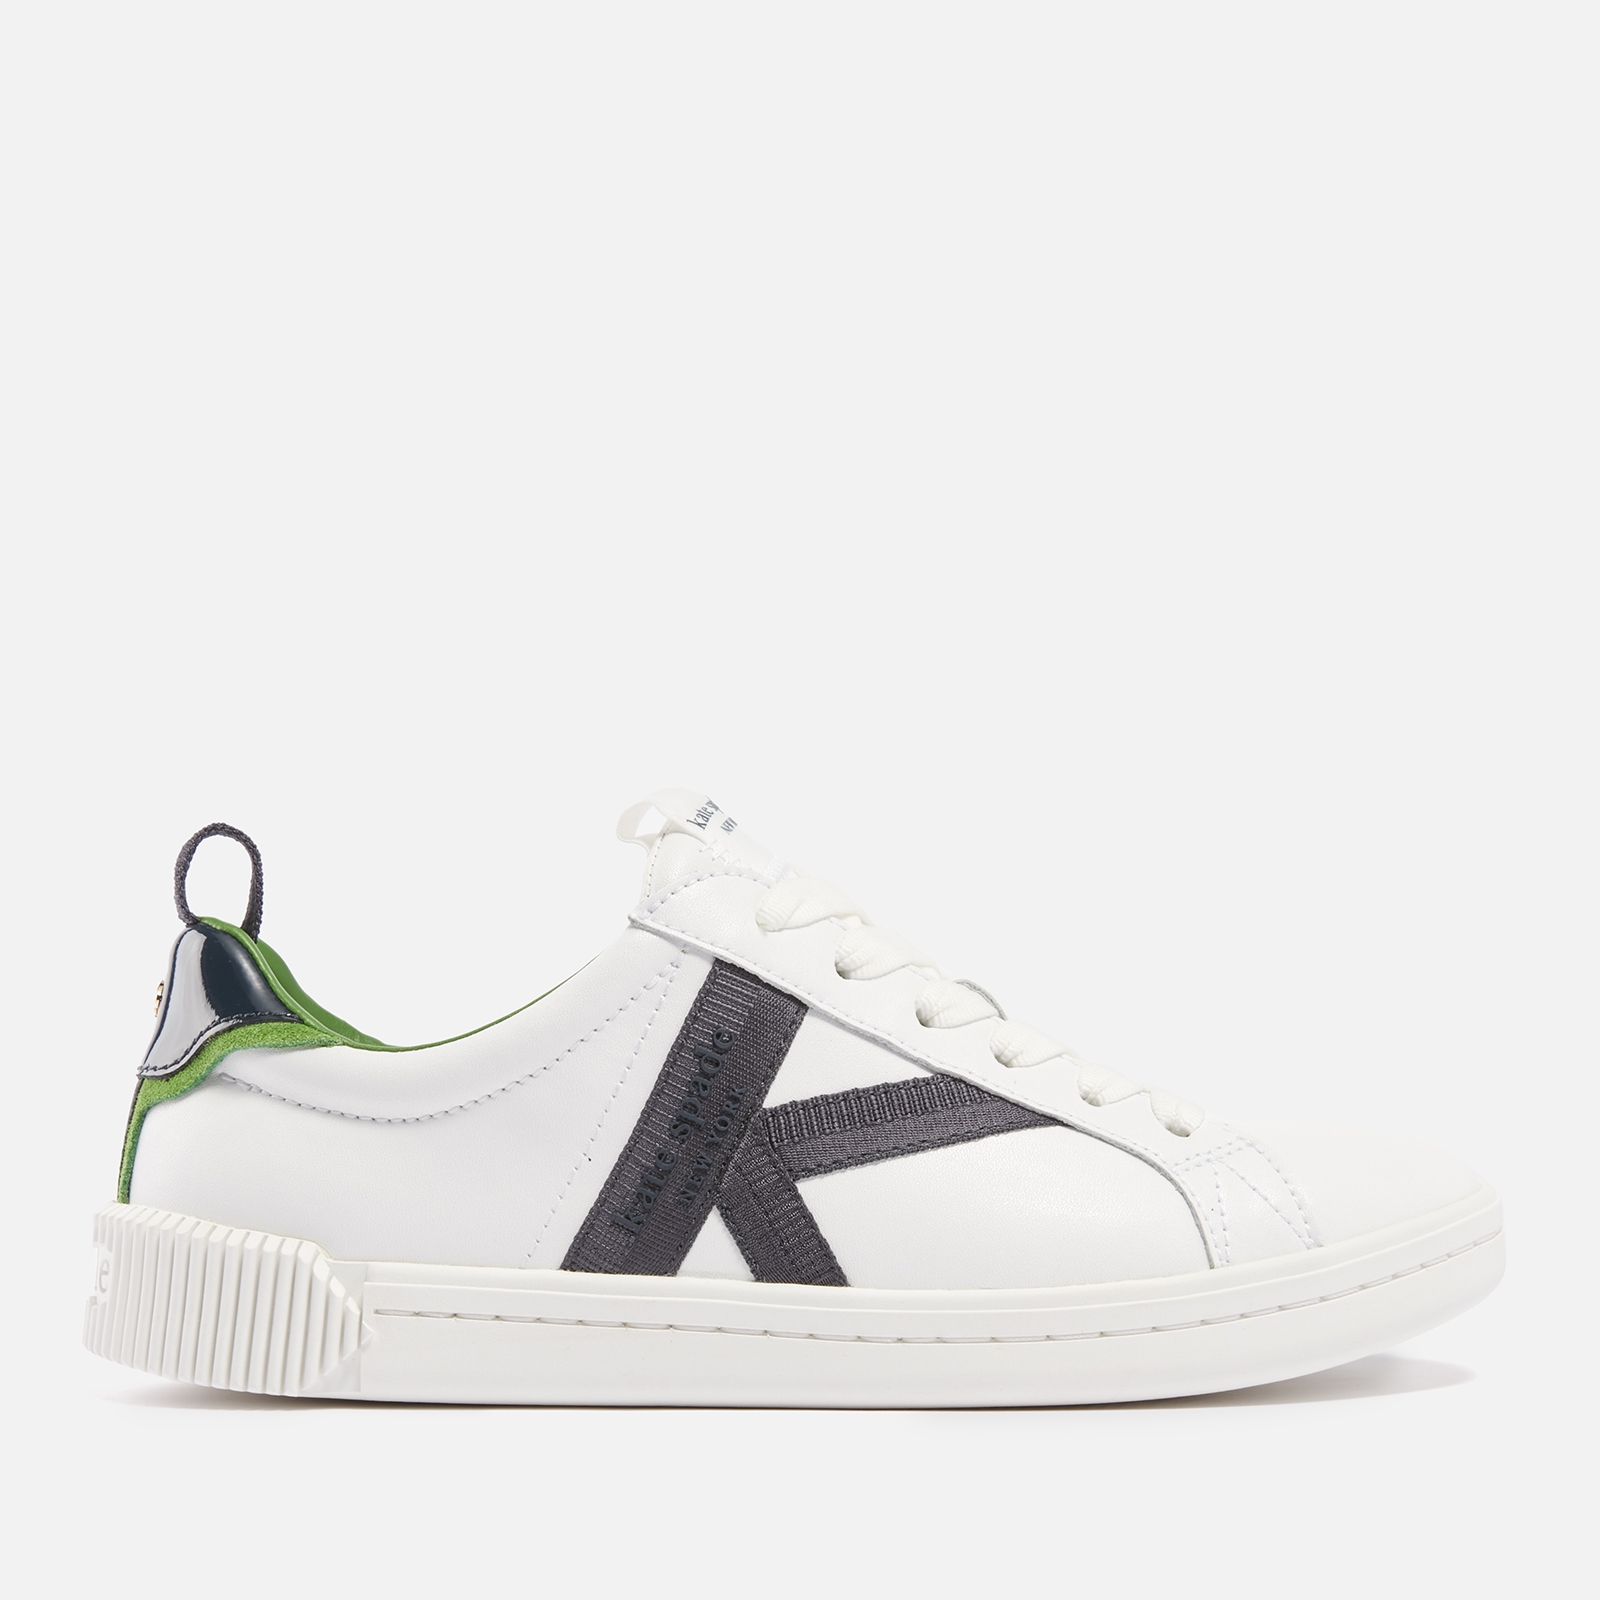 Kate Spade New York Women's Signature K Leather Cupsole Trainers - UK 4 von kate spade new york